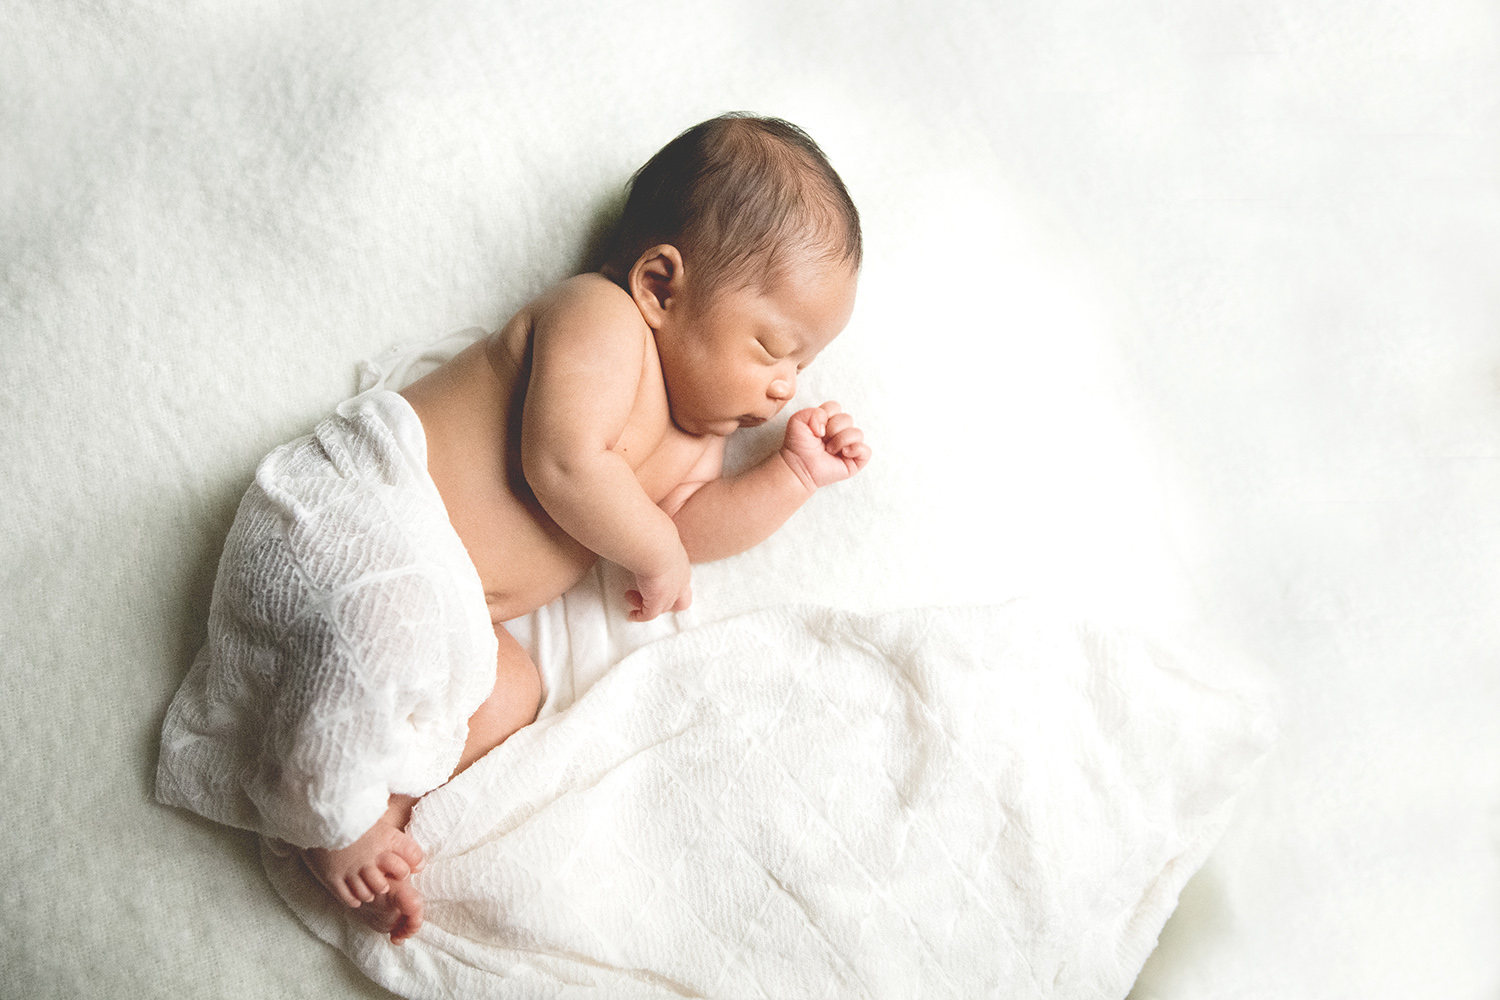 Asian newborn baby partially covered in an off-white knit blanket lying on her side on a white blanket.